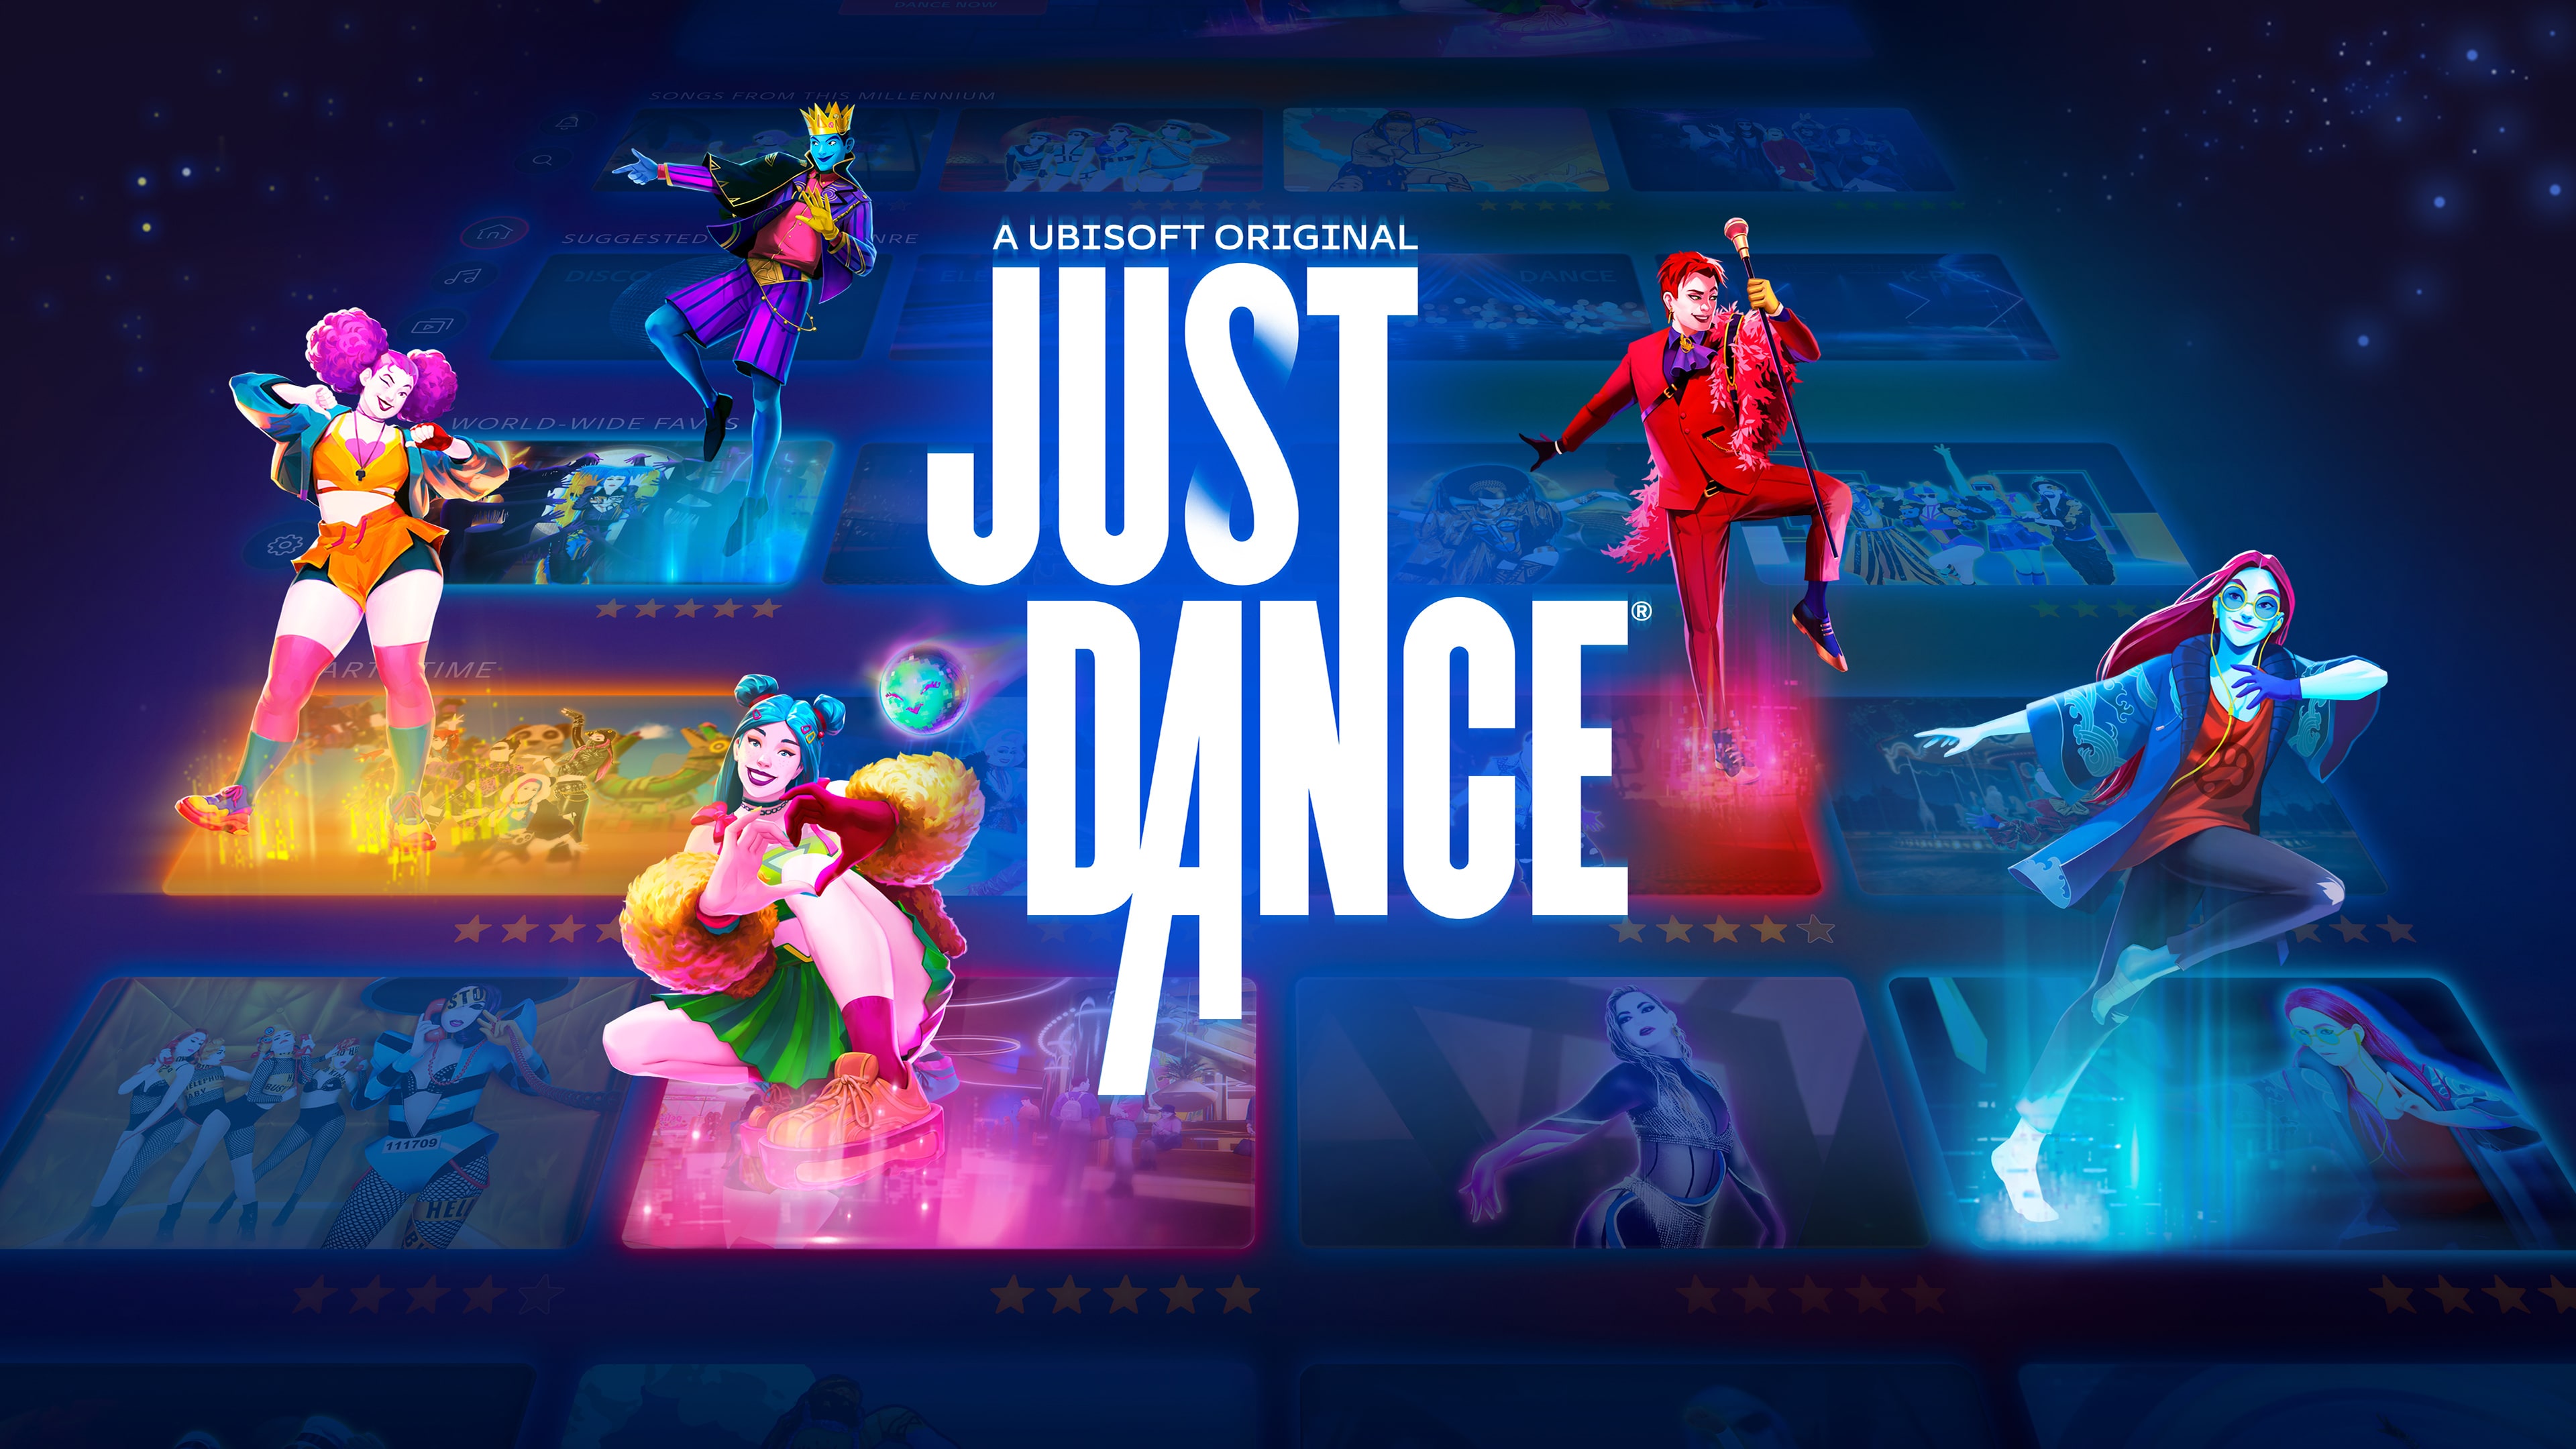 Just Dance® (Simplified Chinese, English, Korean, Japanese, Traditional Chinese)